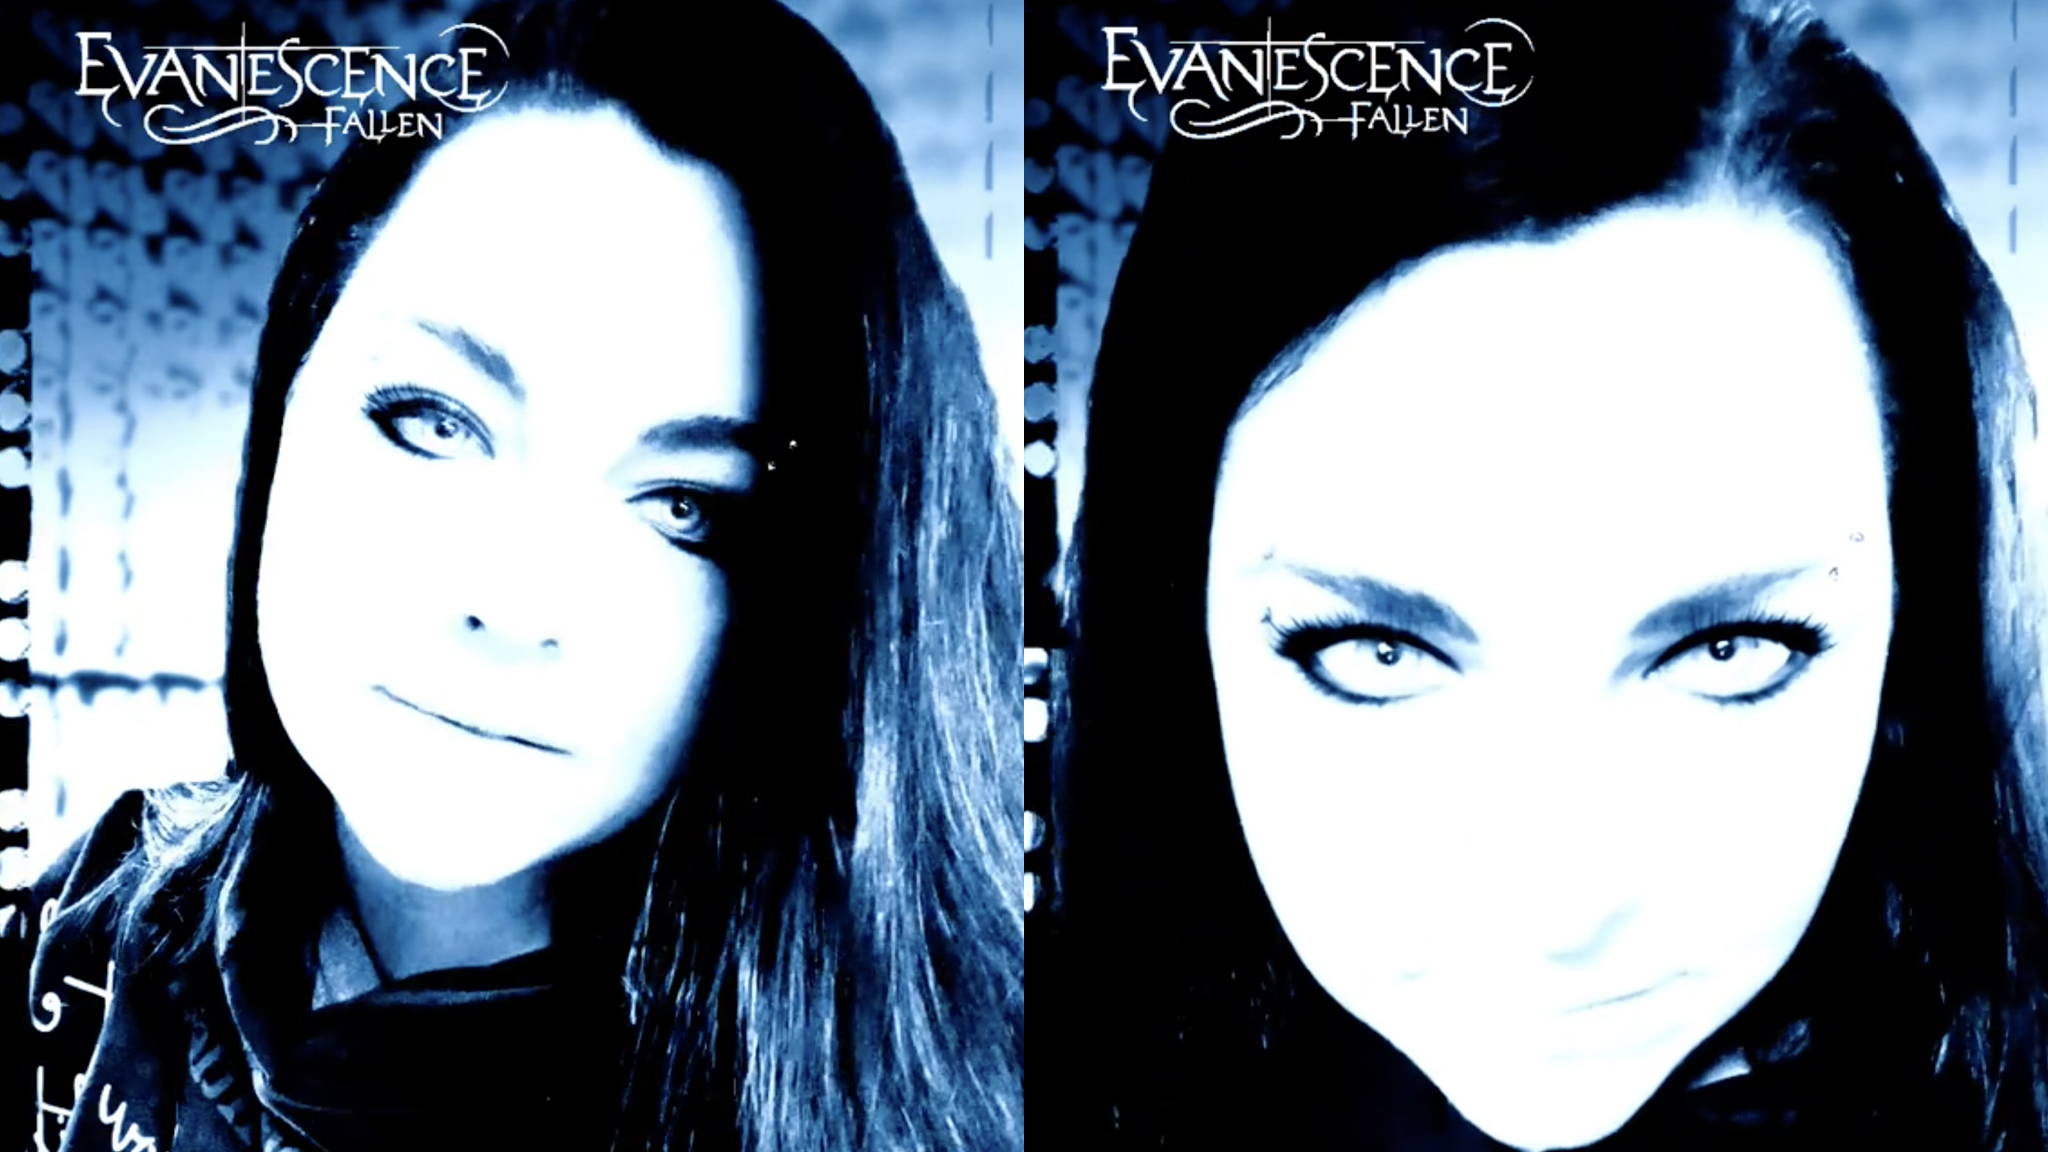 Amy Lee manages to keep Evanescence prosperous